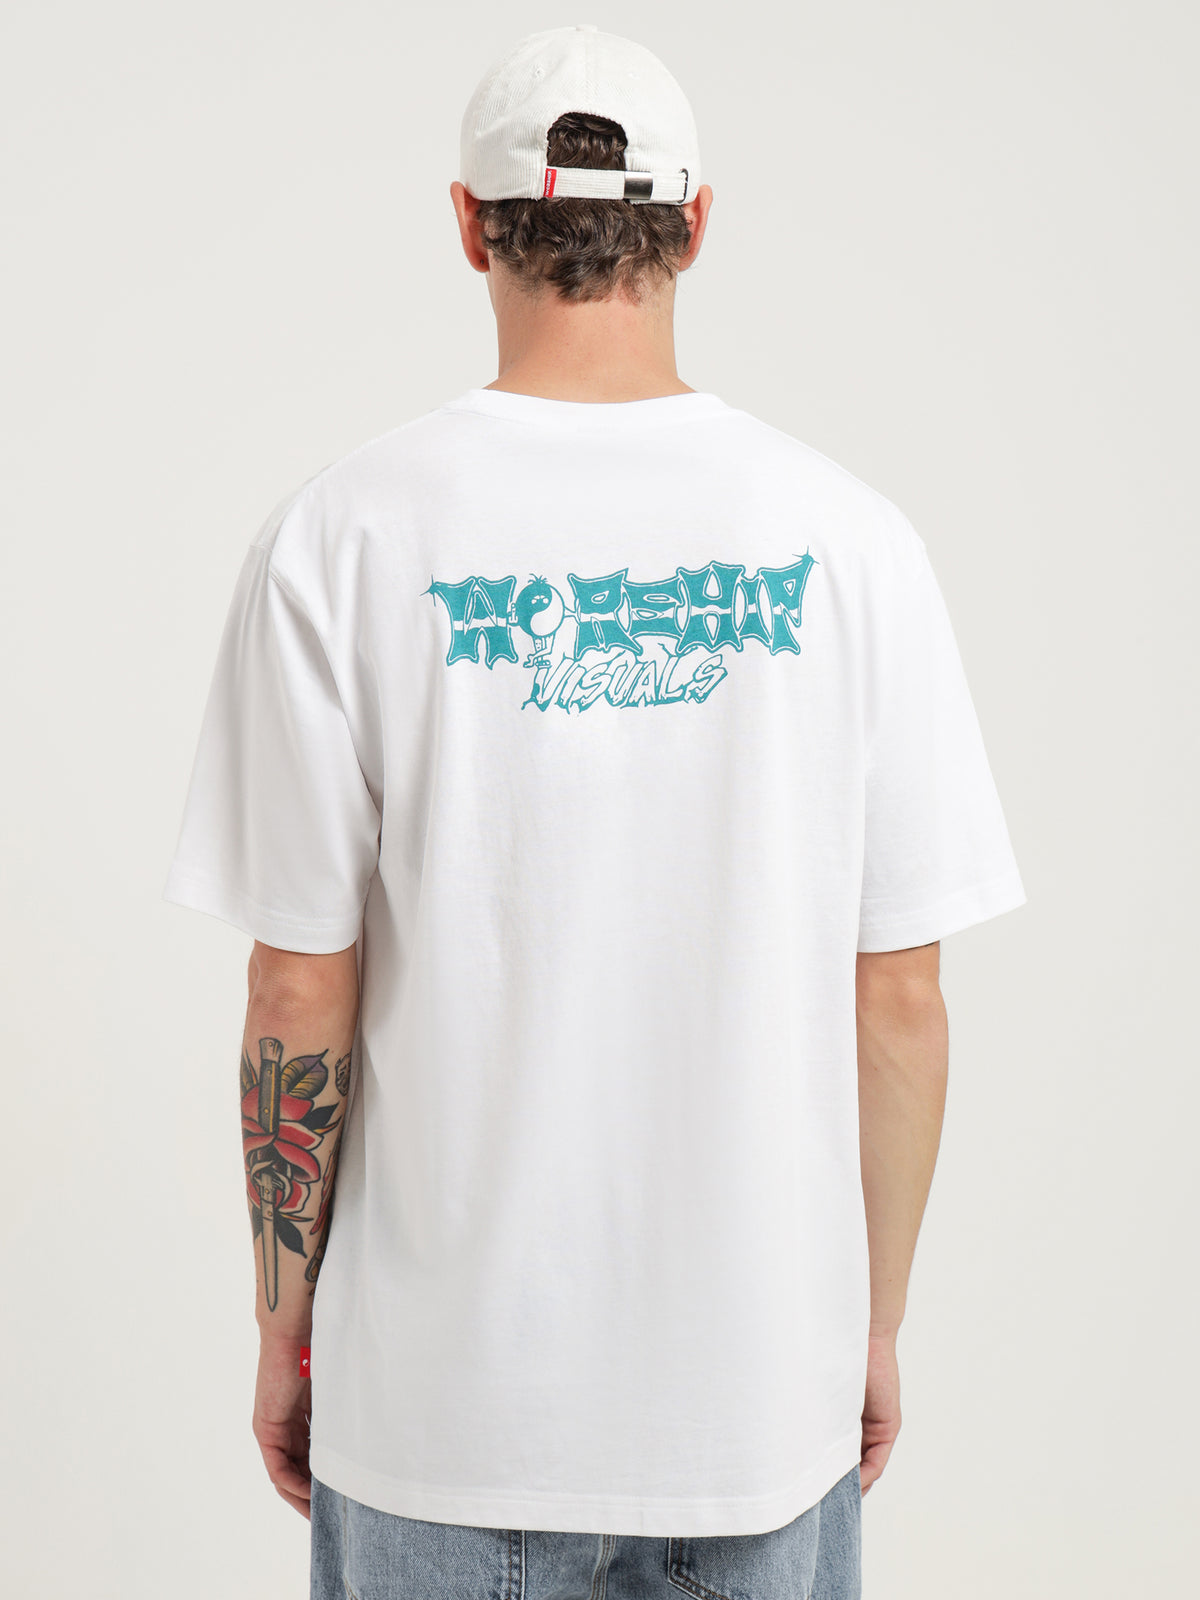 Peep Show T-Shirt in White